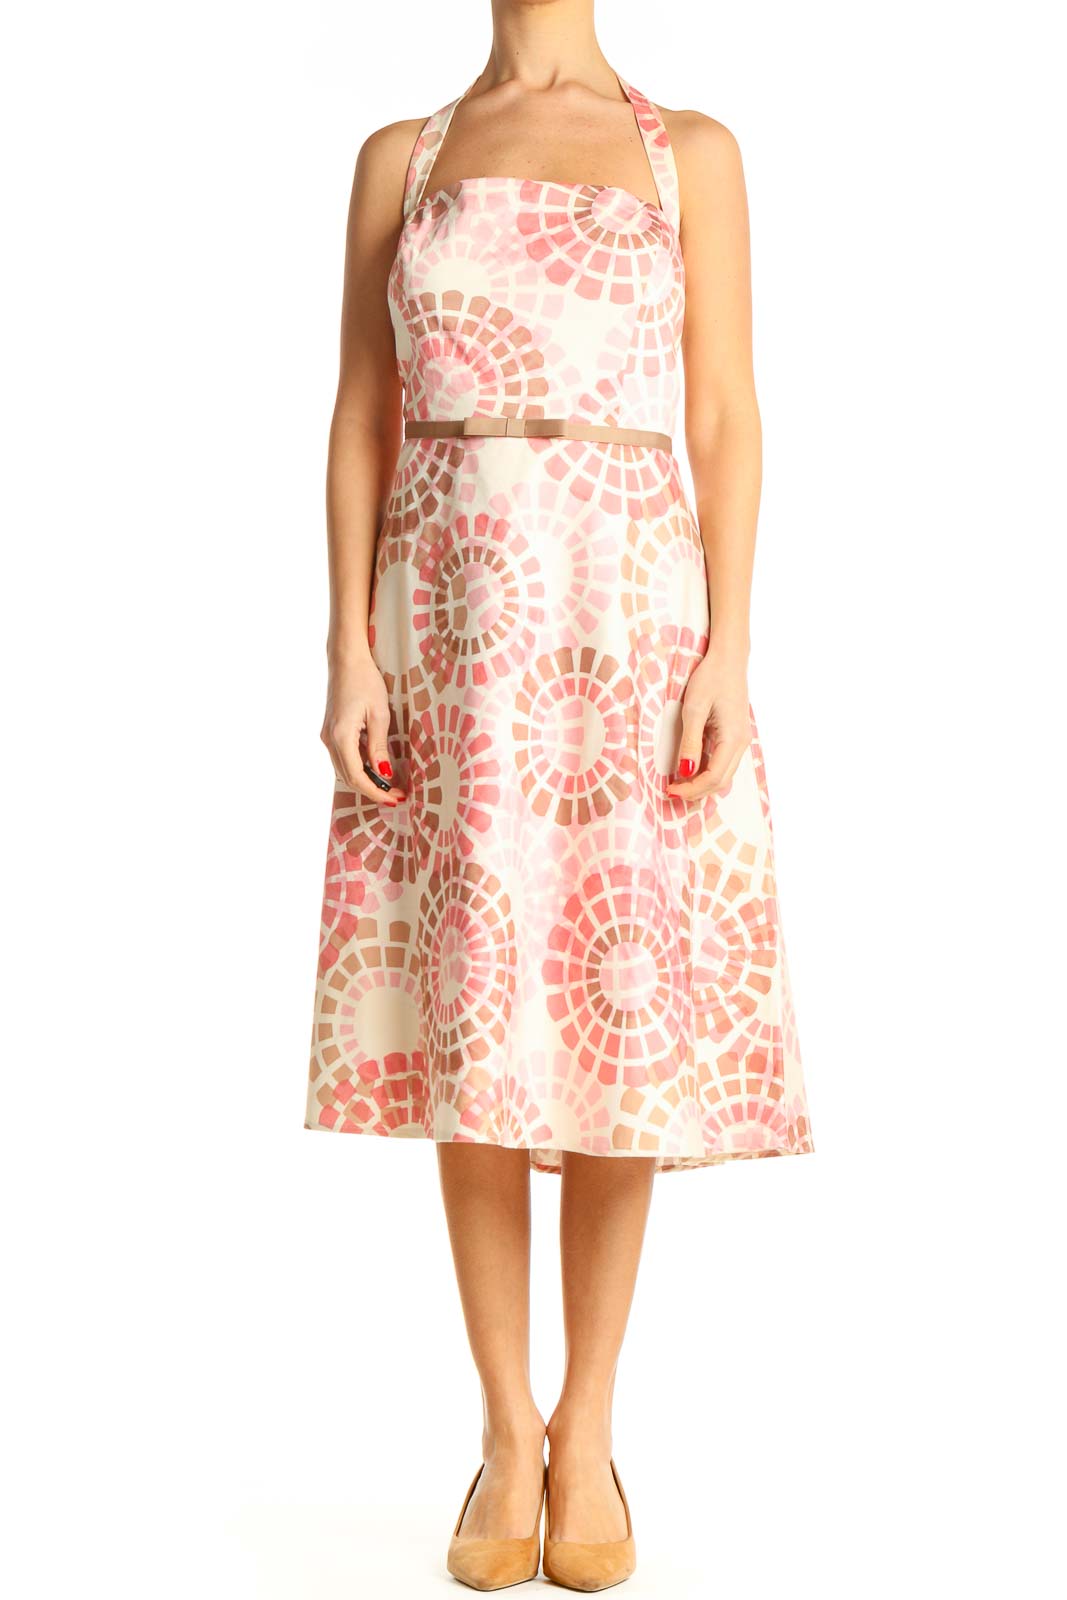 Pink Graphic Print Holiday Fit & Flare Dress Front